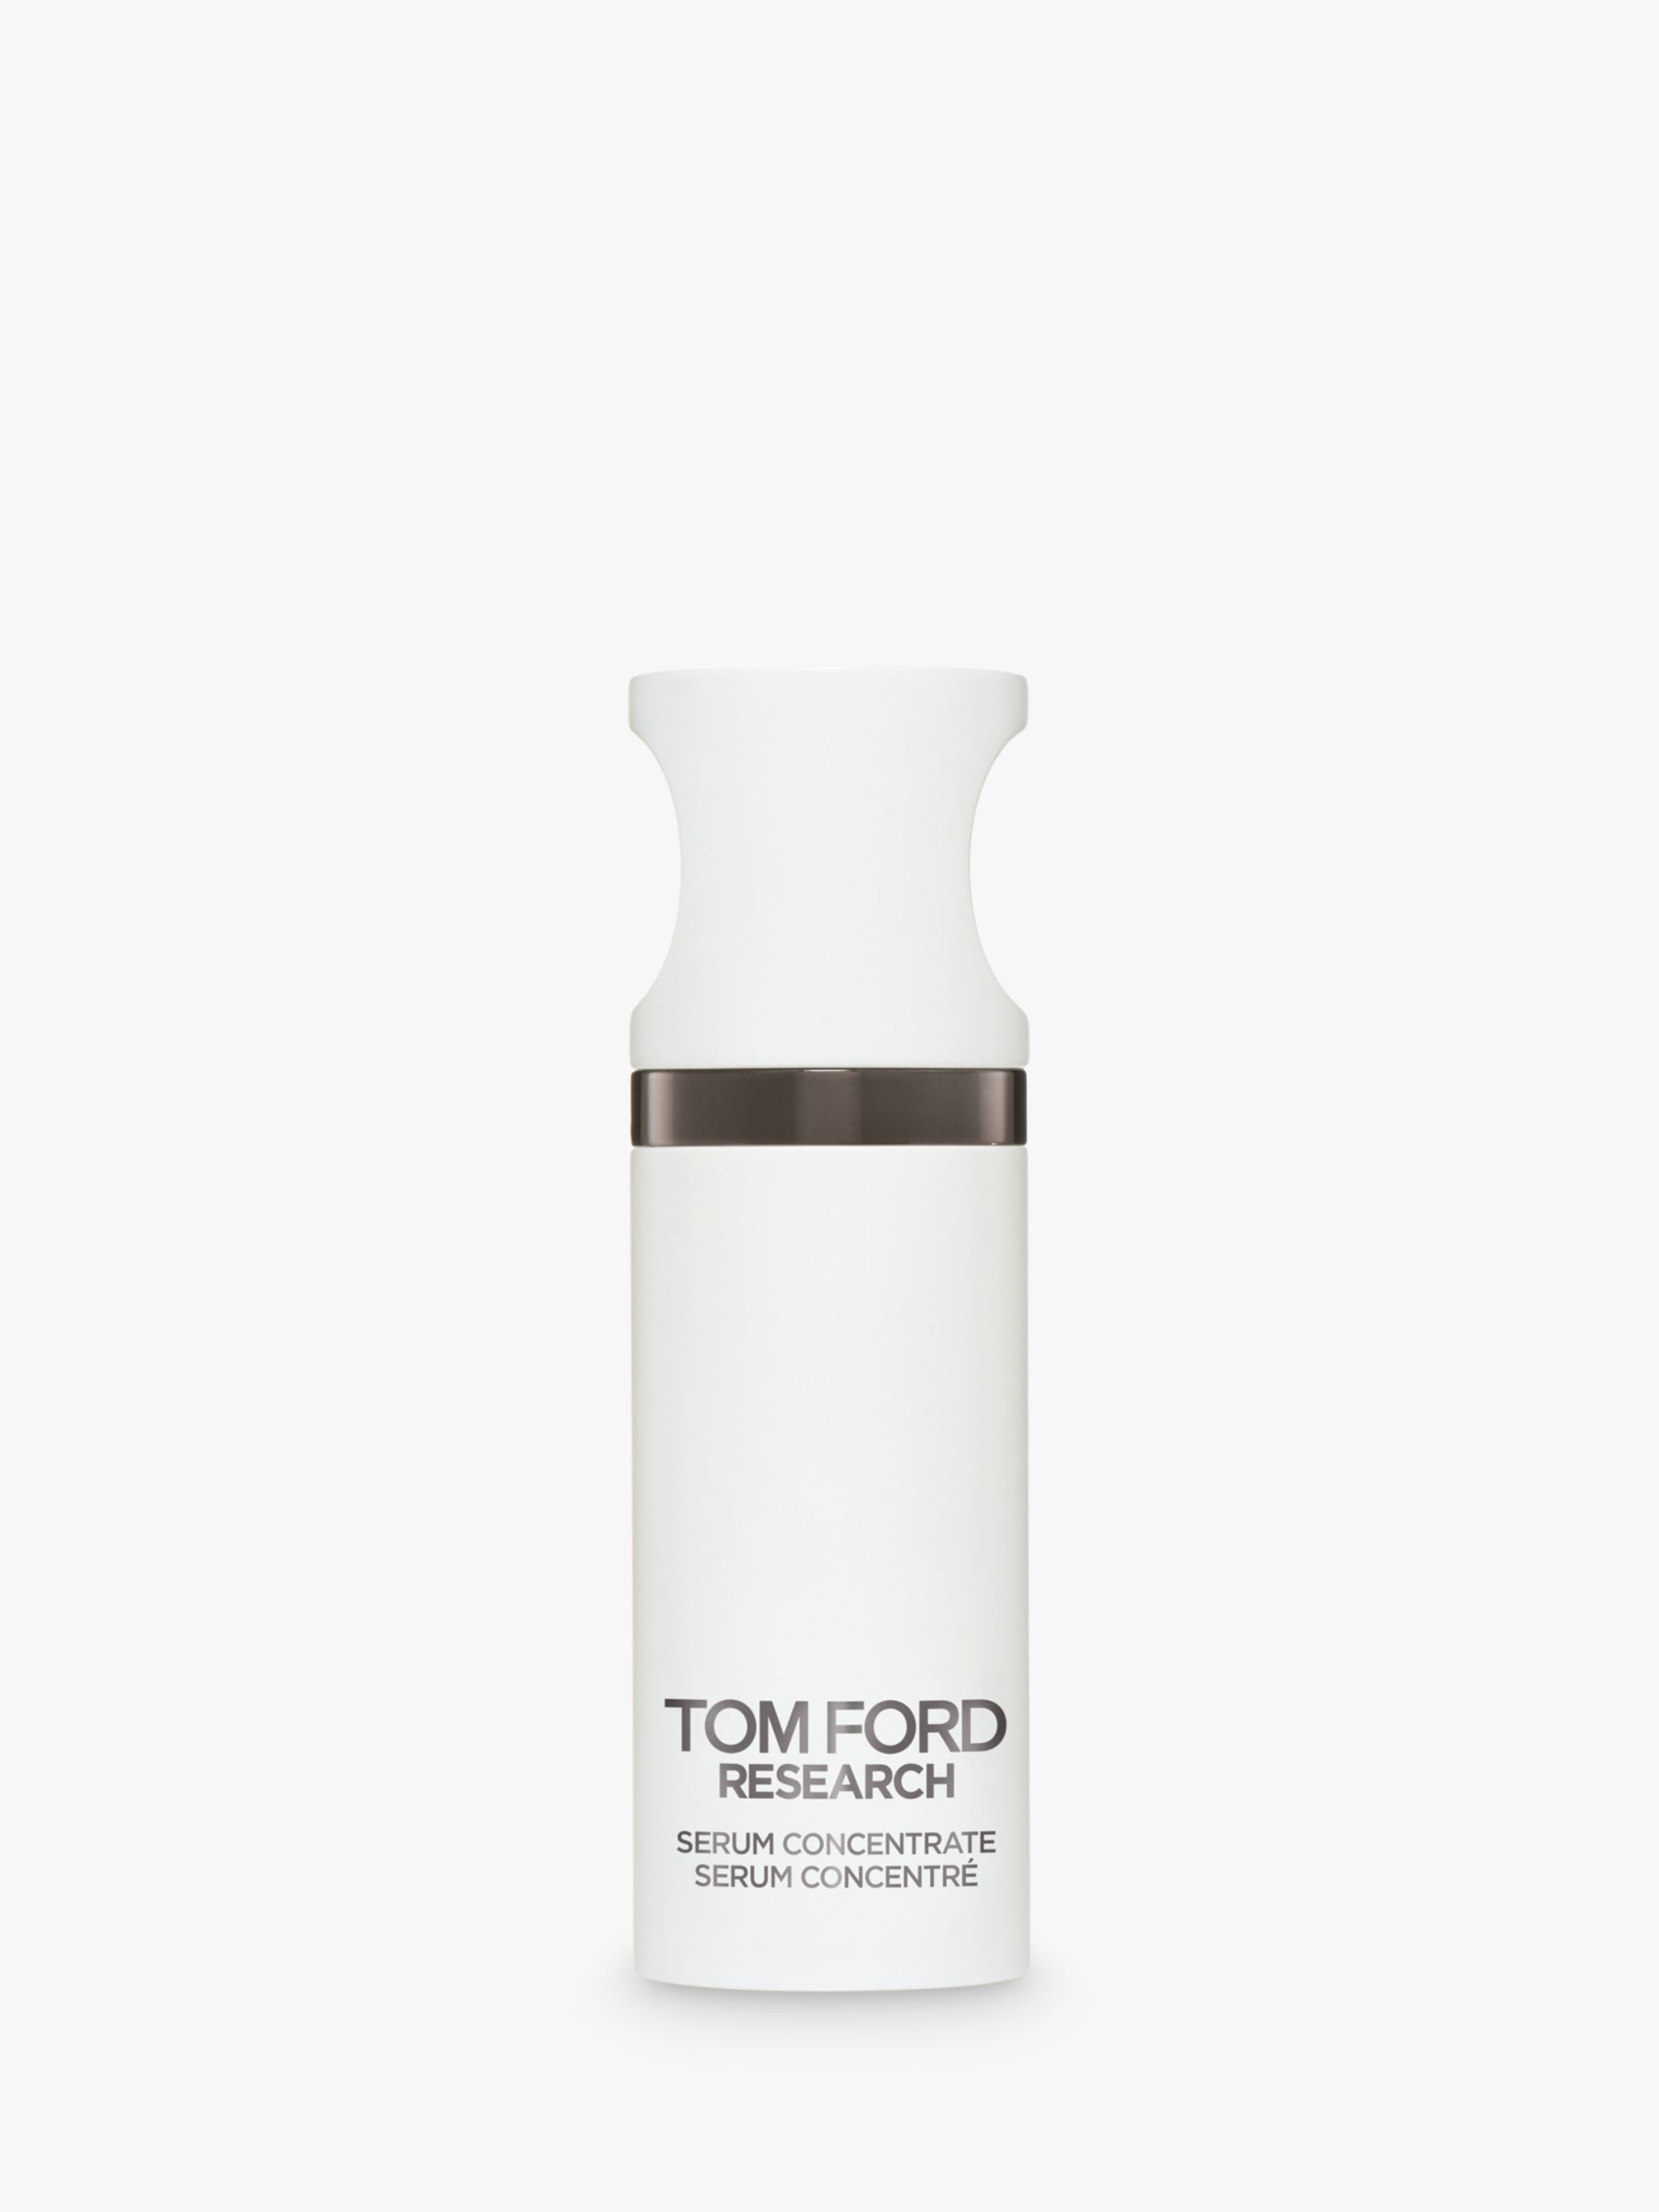 TOM FORD Research Serum Concentrate, 20ml 1